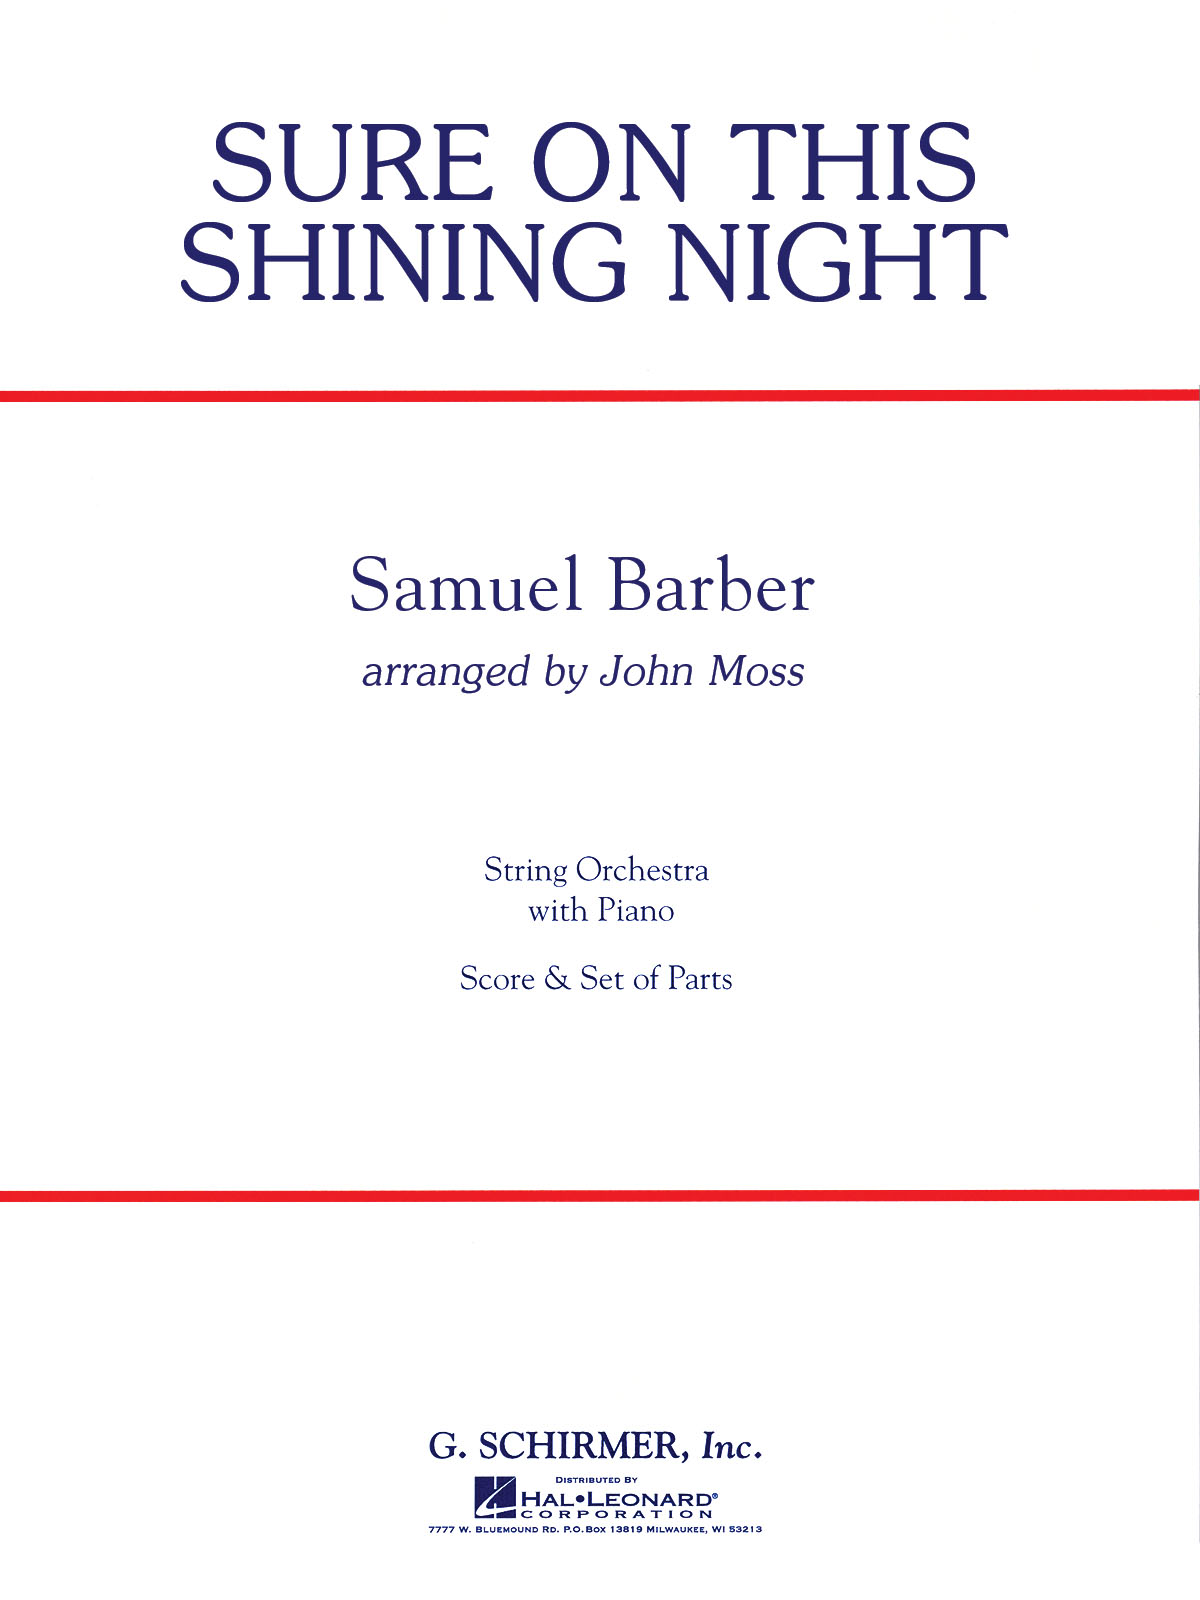 Sure On This Shining Night - Score Only: String Orchestra: Score